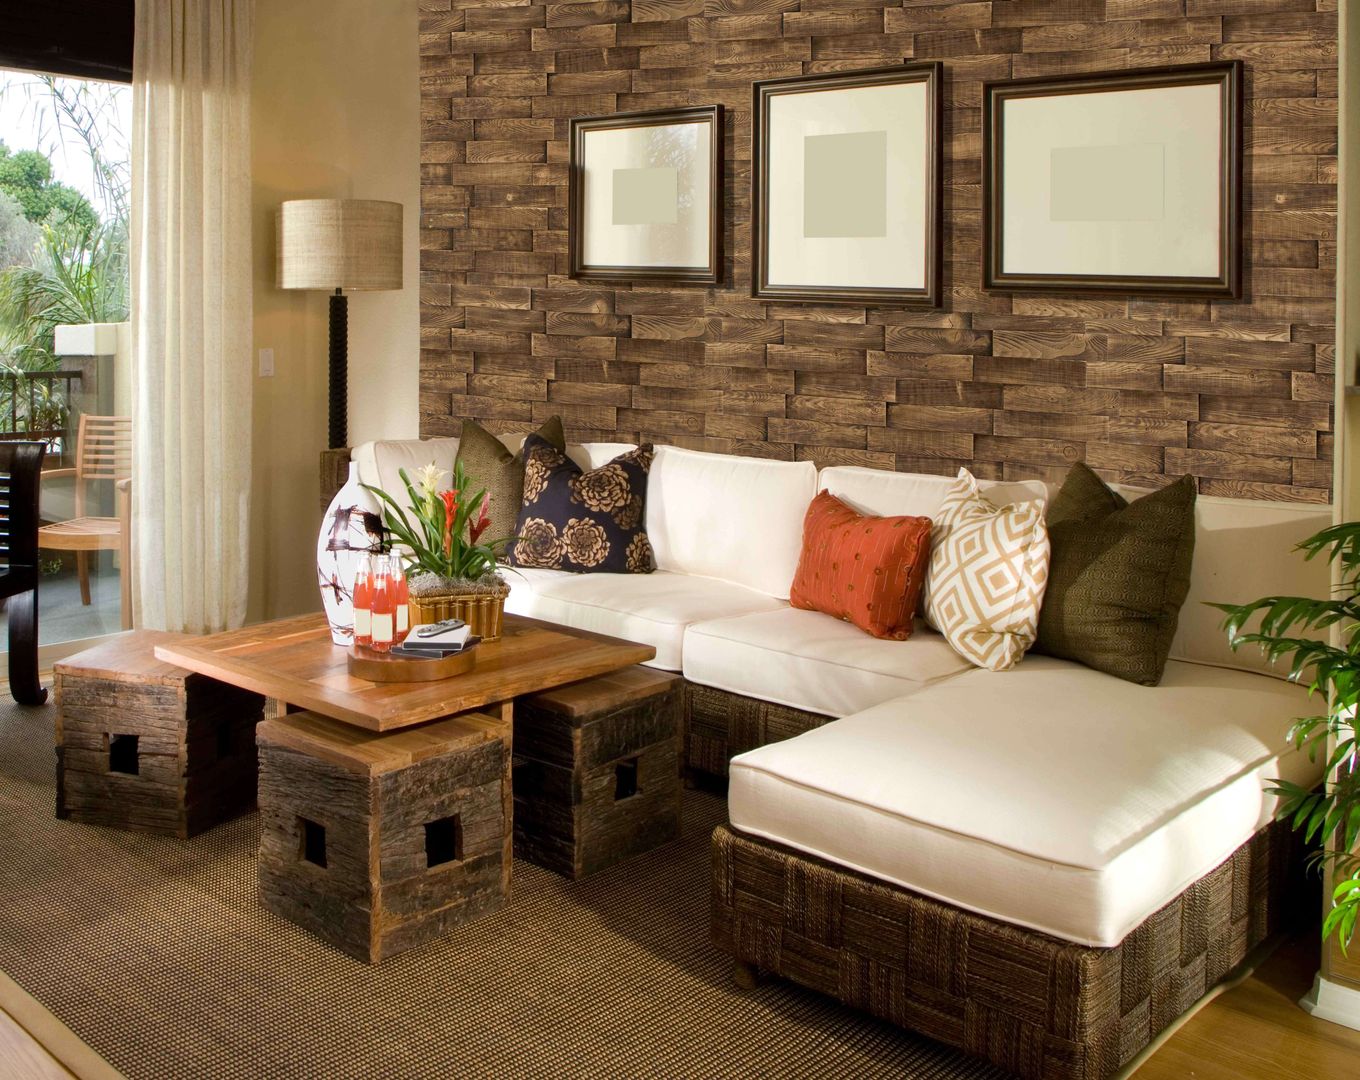 homify Rustic style walls & floors Chipboard